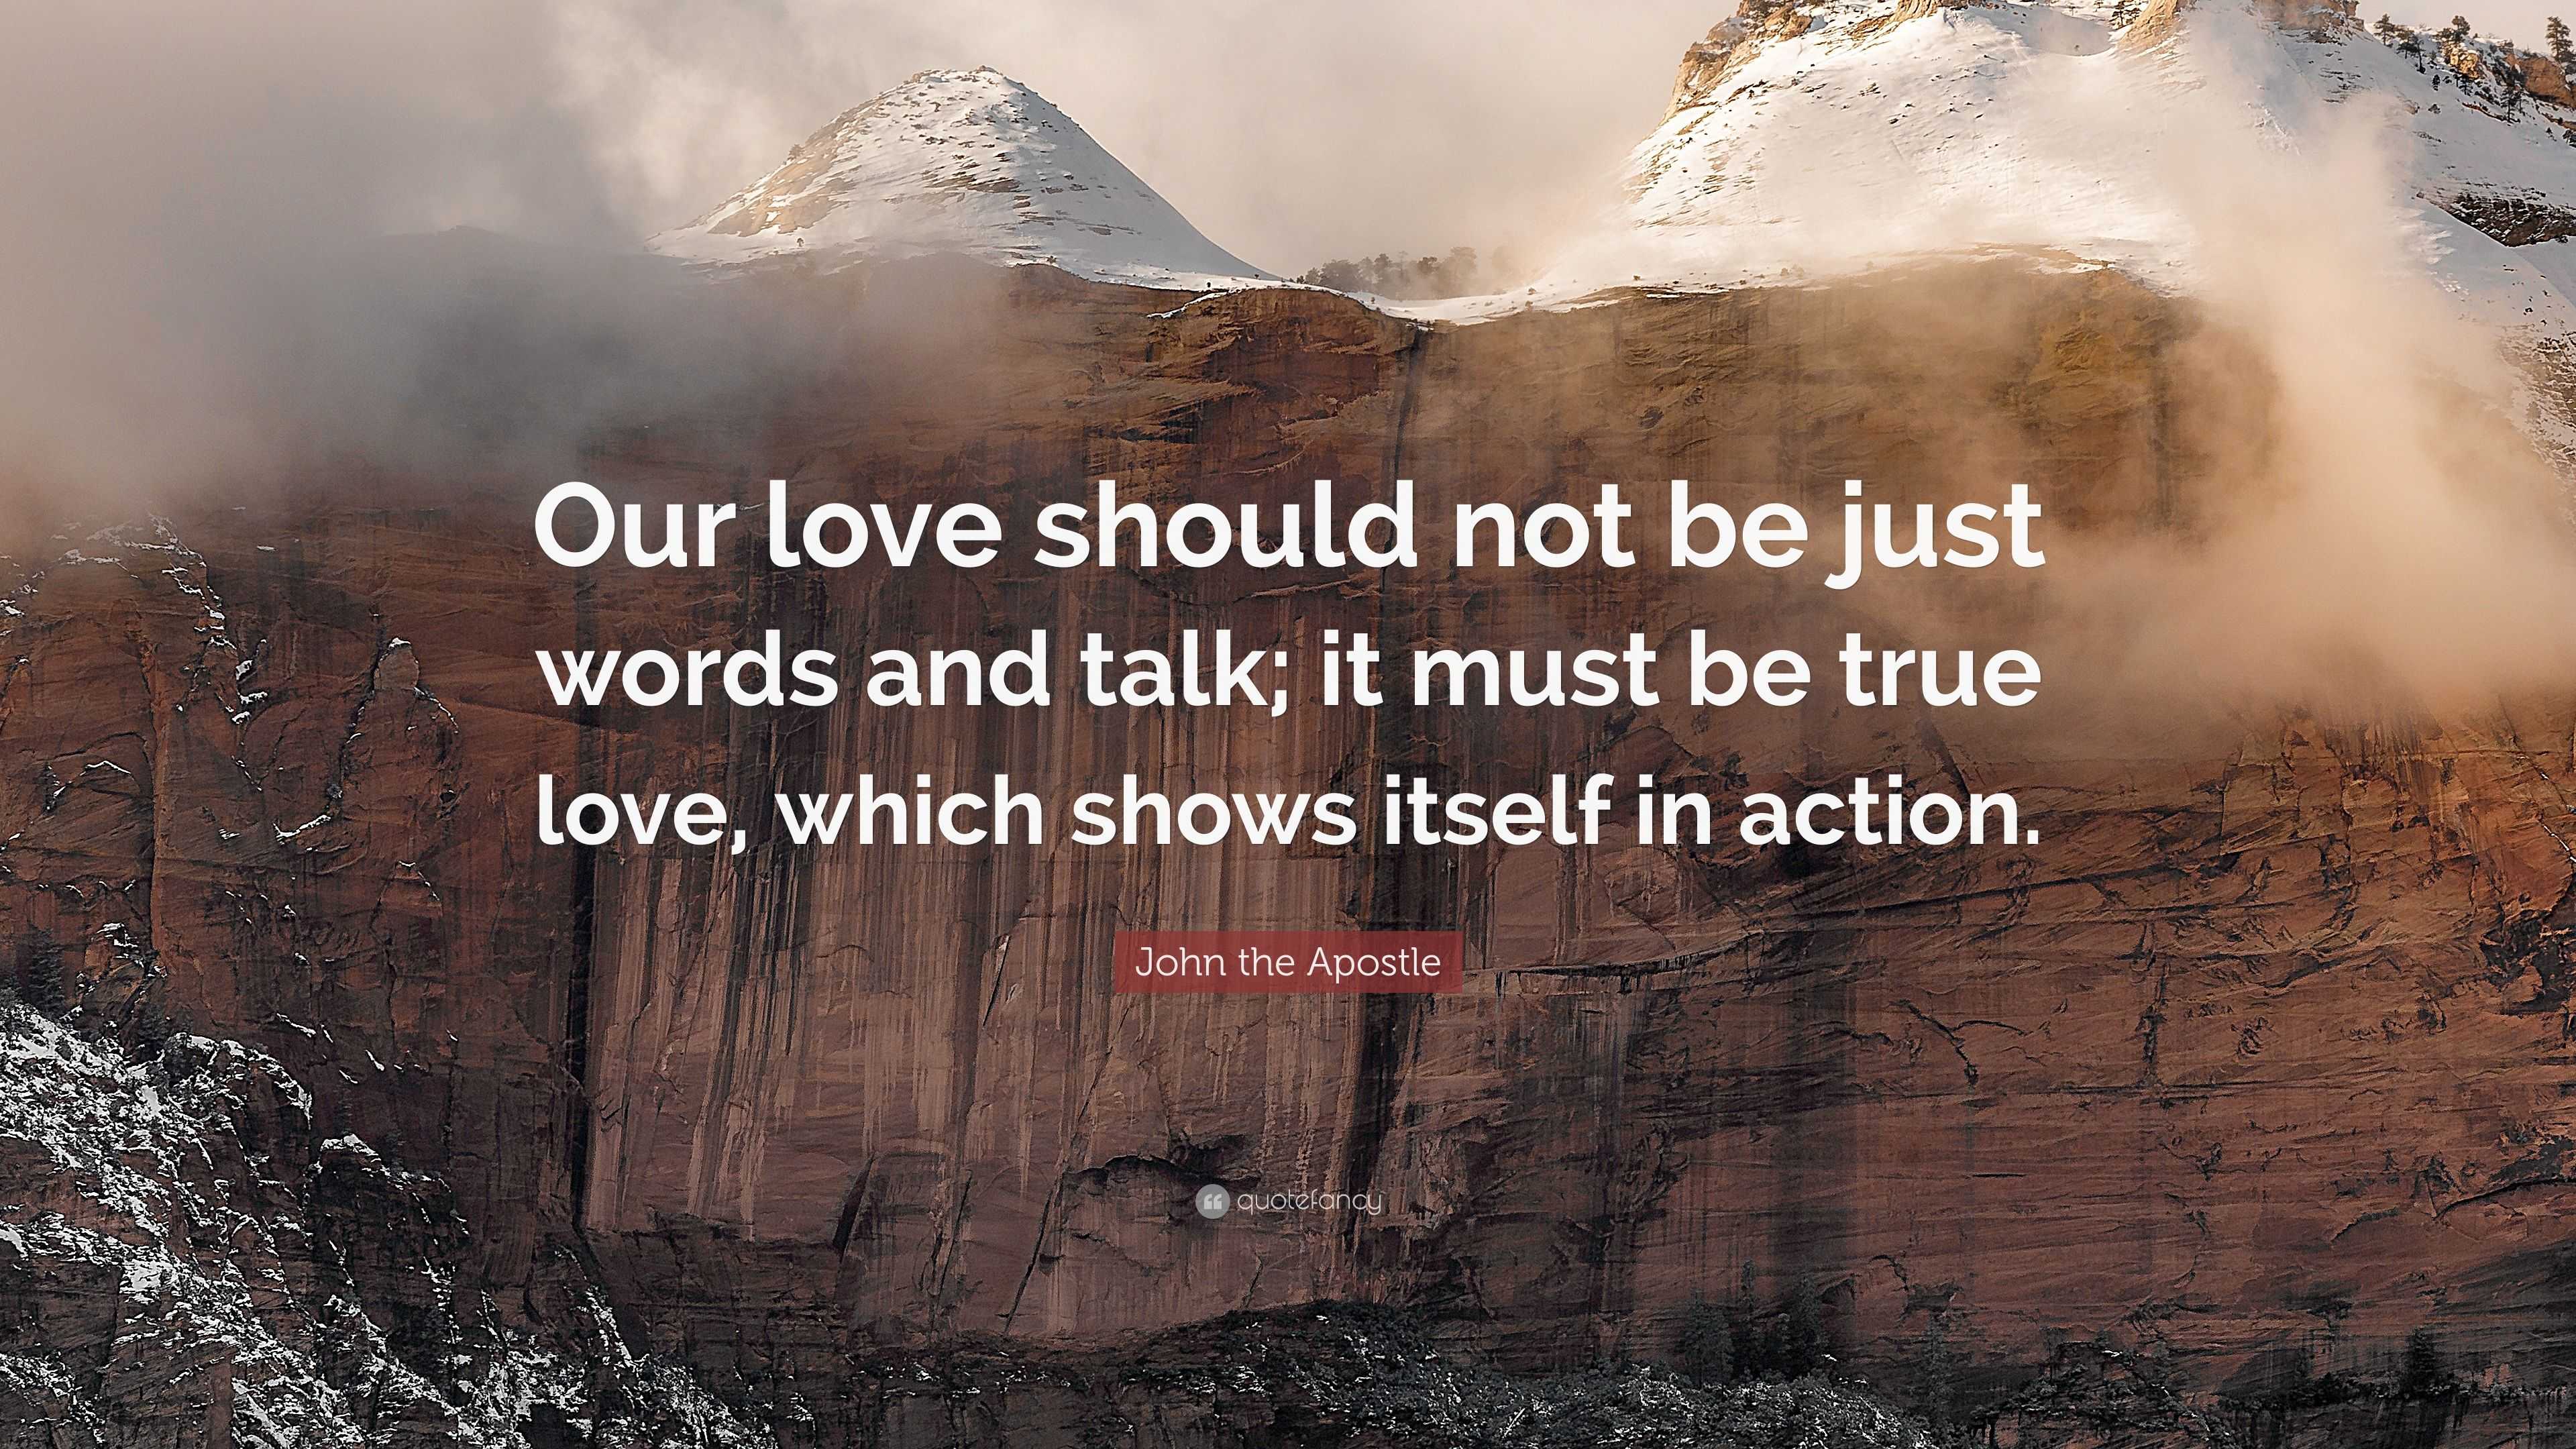 John the Apostle Quote: “Our love should not be just words and talk; it ...